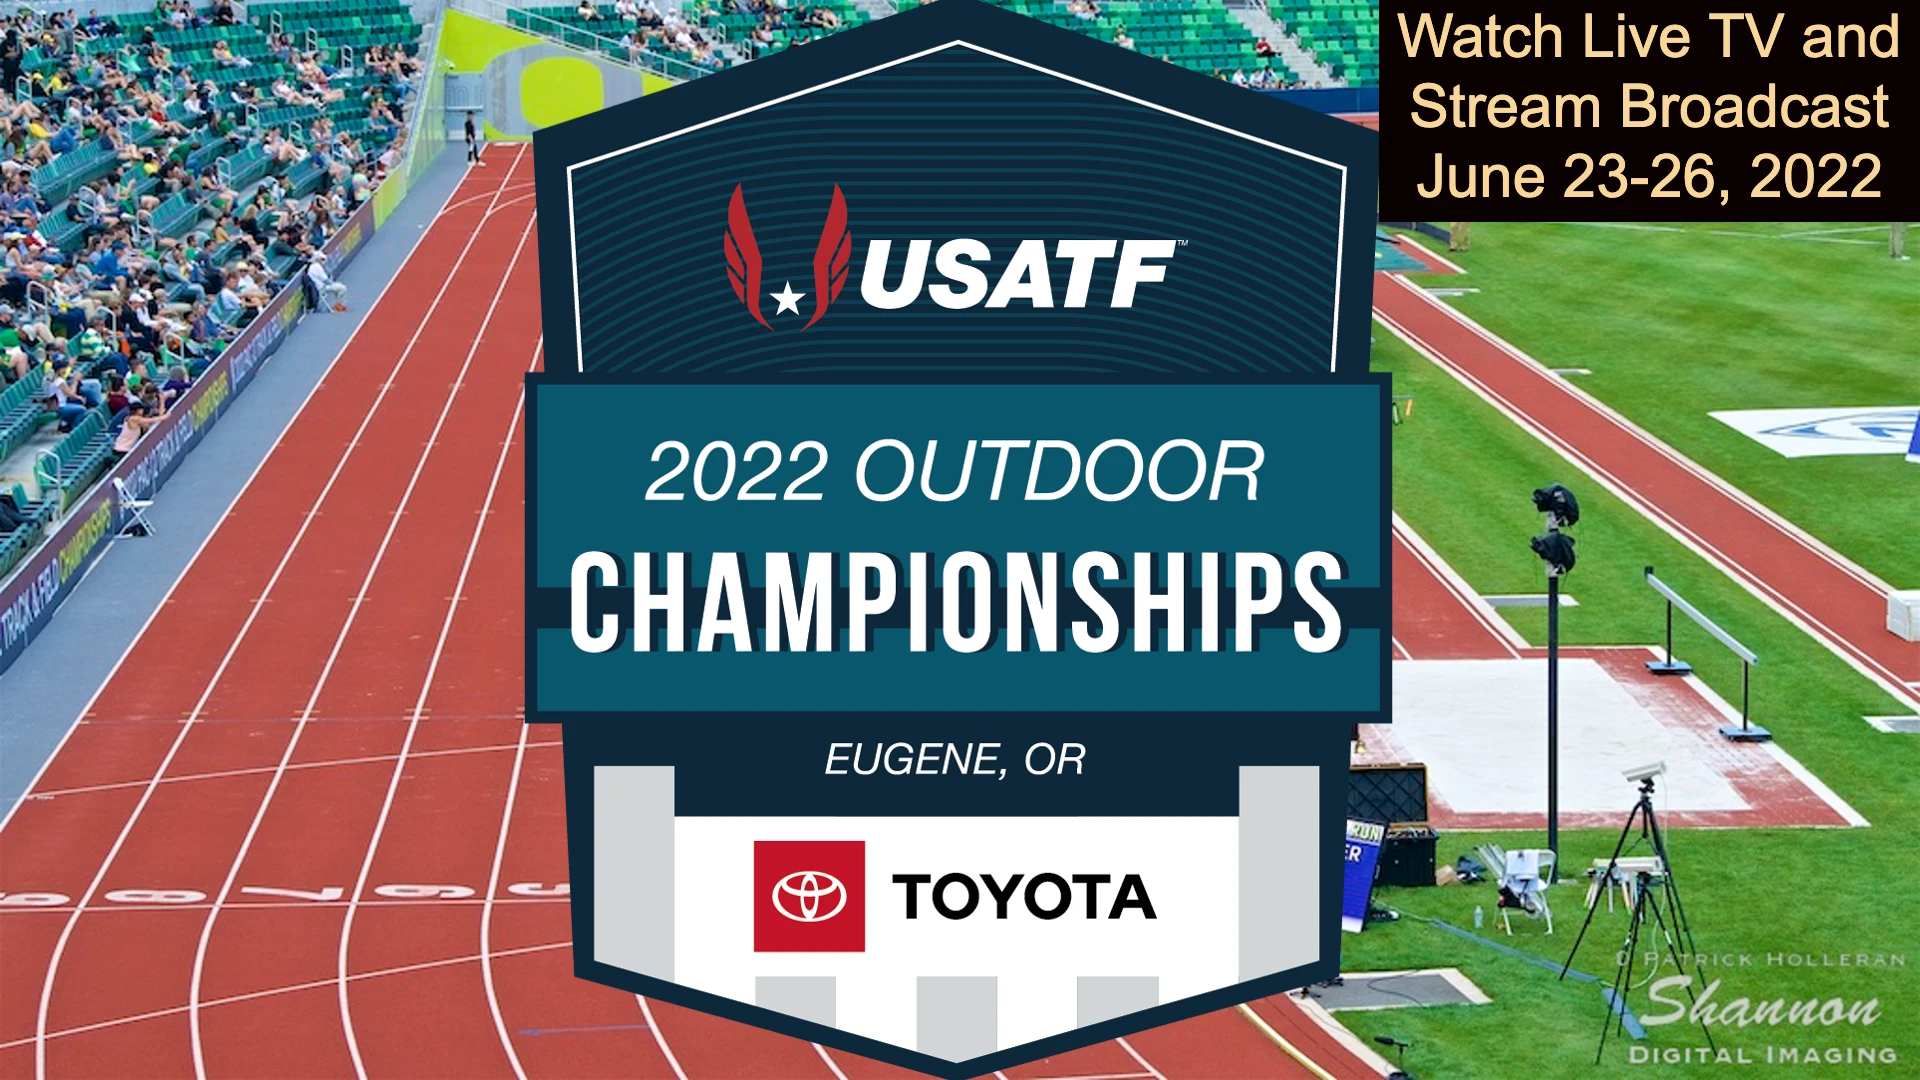 When is the 2022 Toyota USATF Outdoor Championships and how to watch?